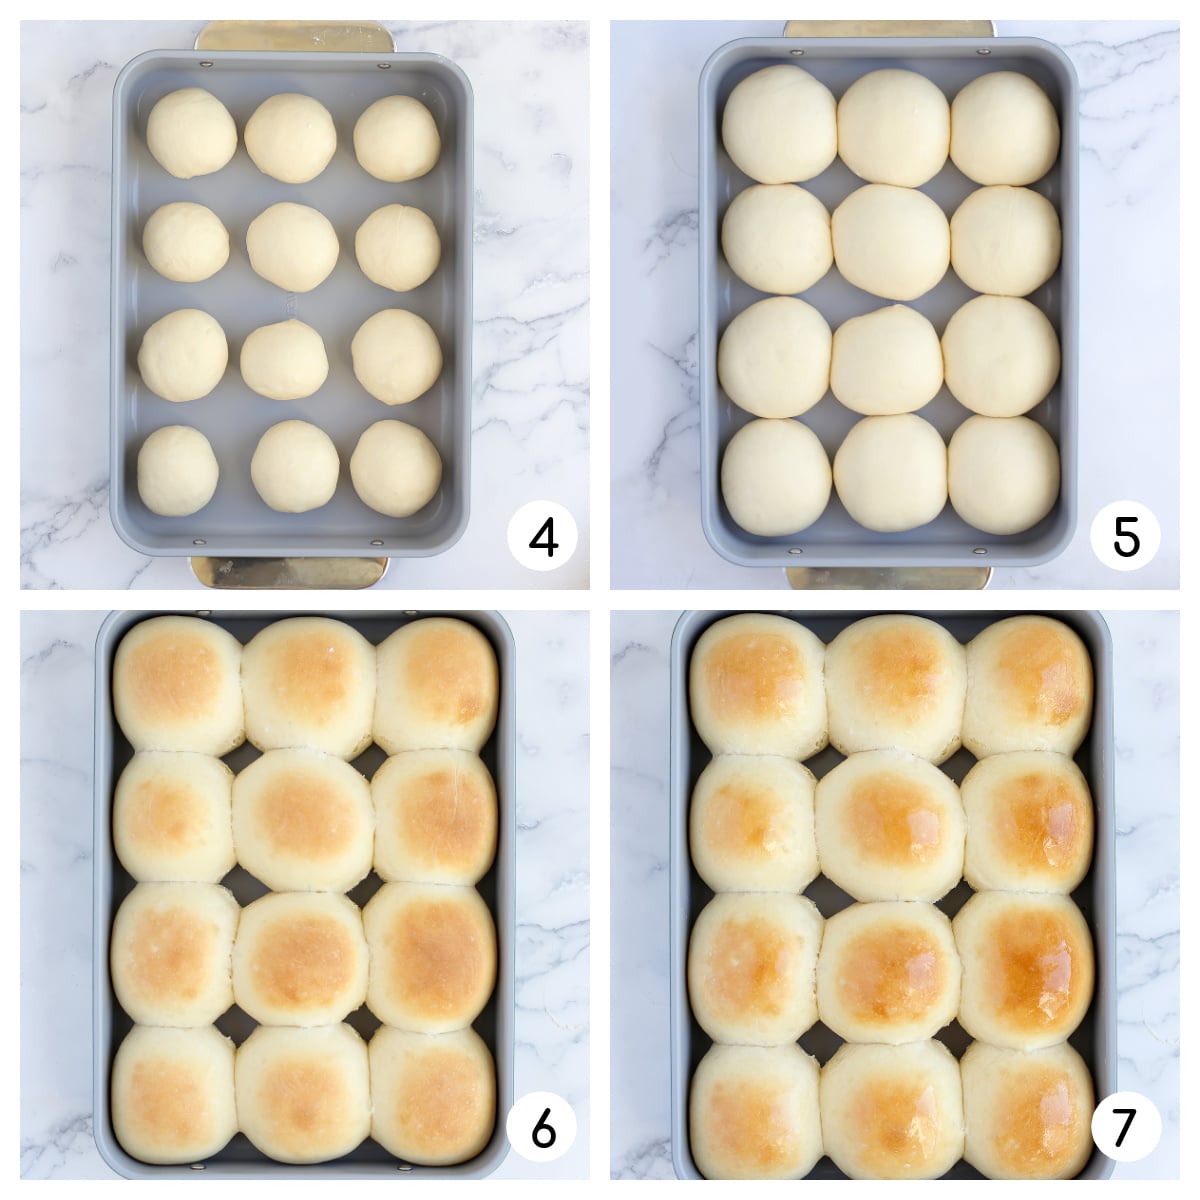 Process shots showing how to bake this dinner roll recipe.